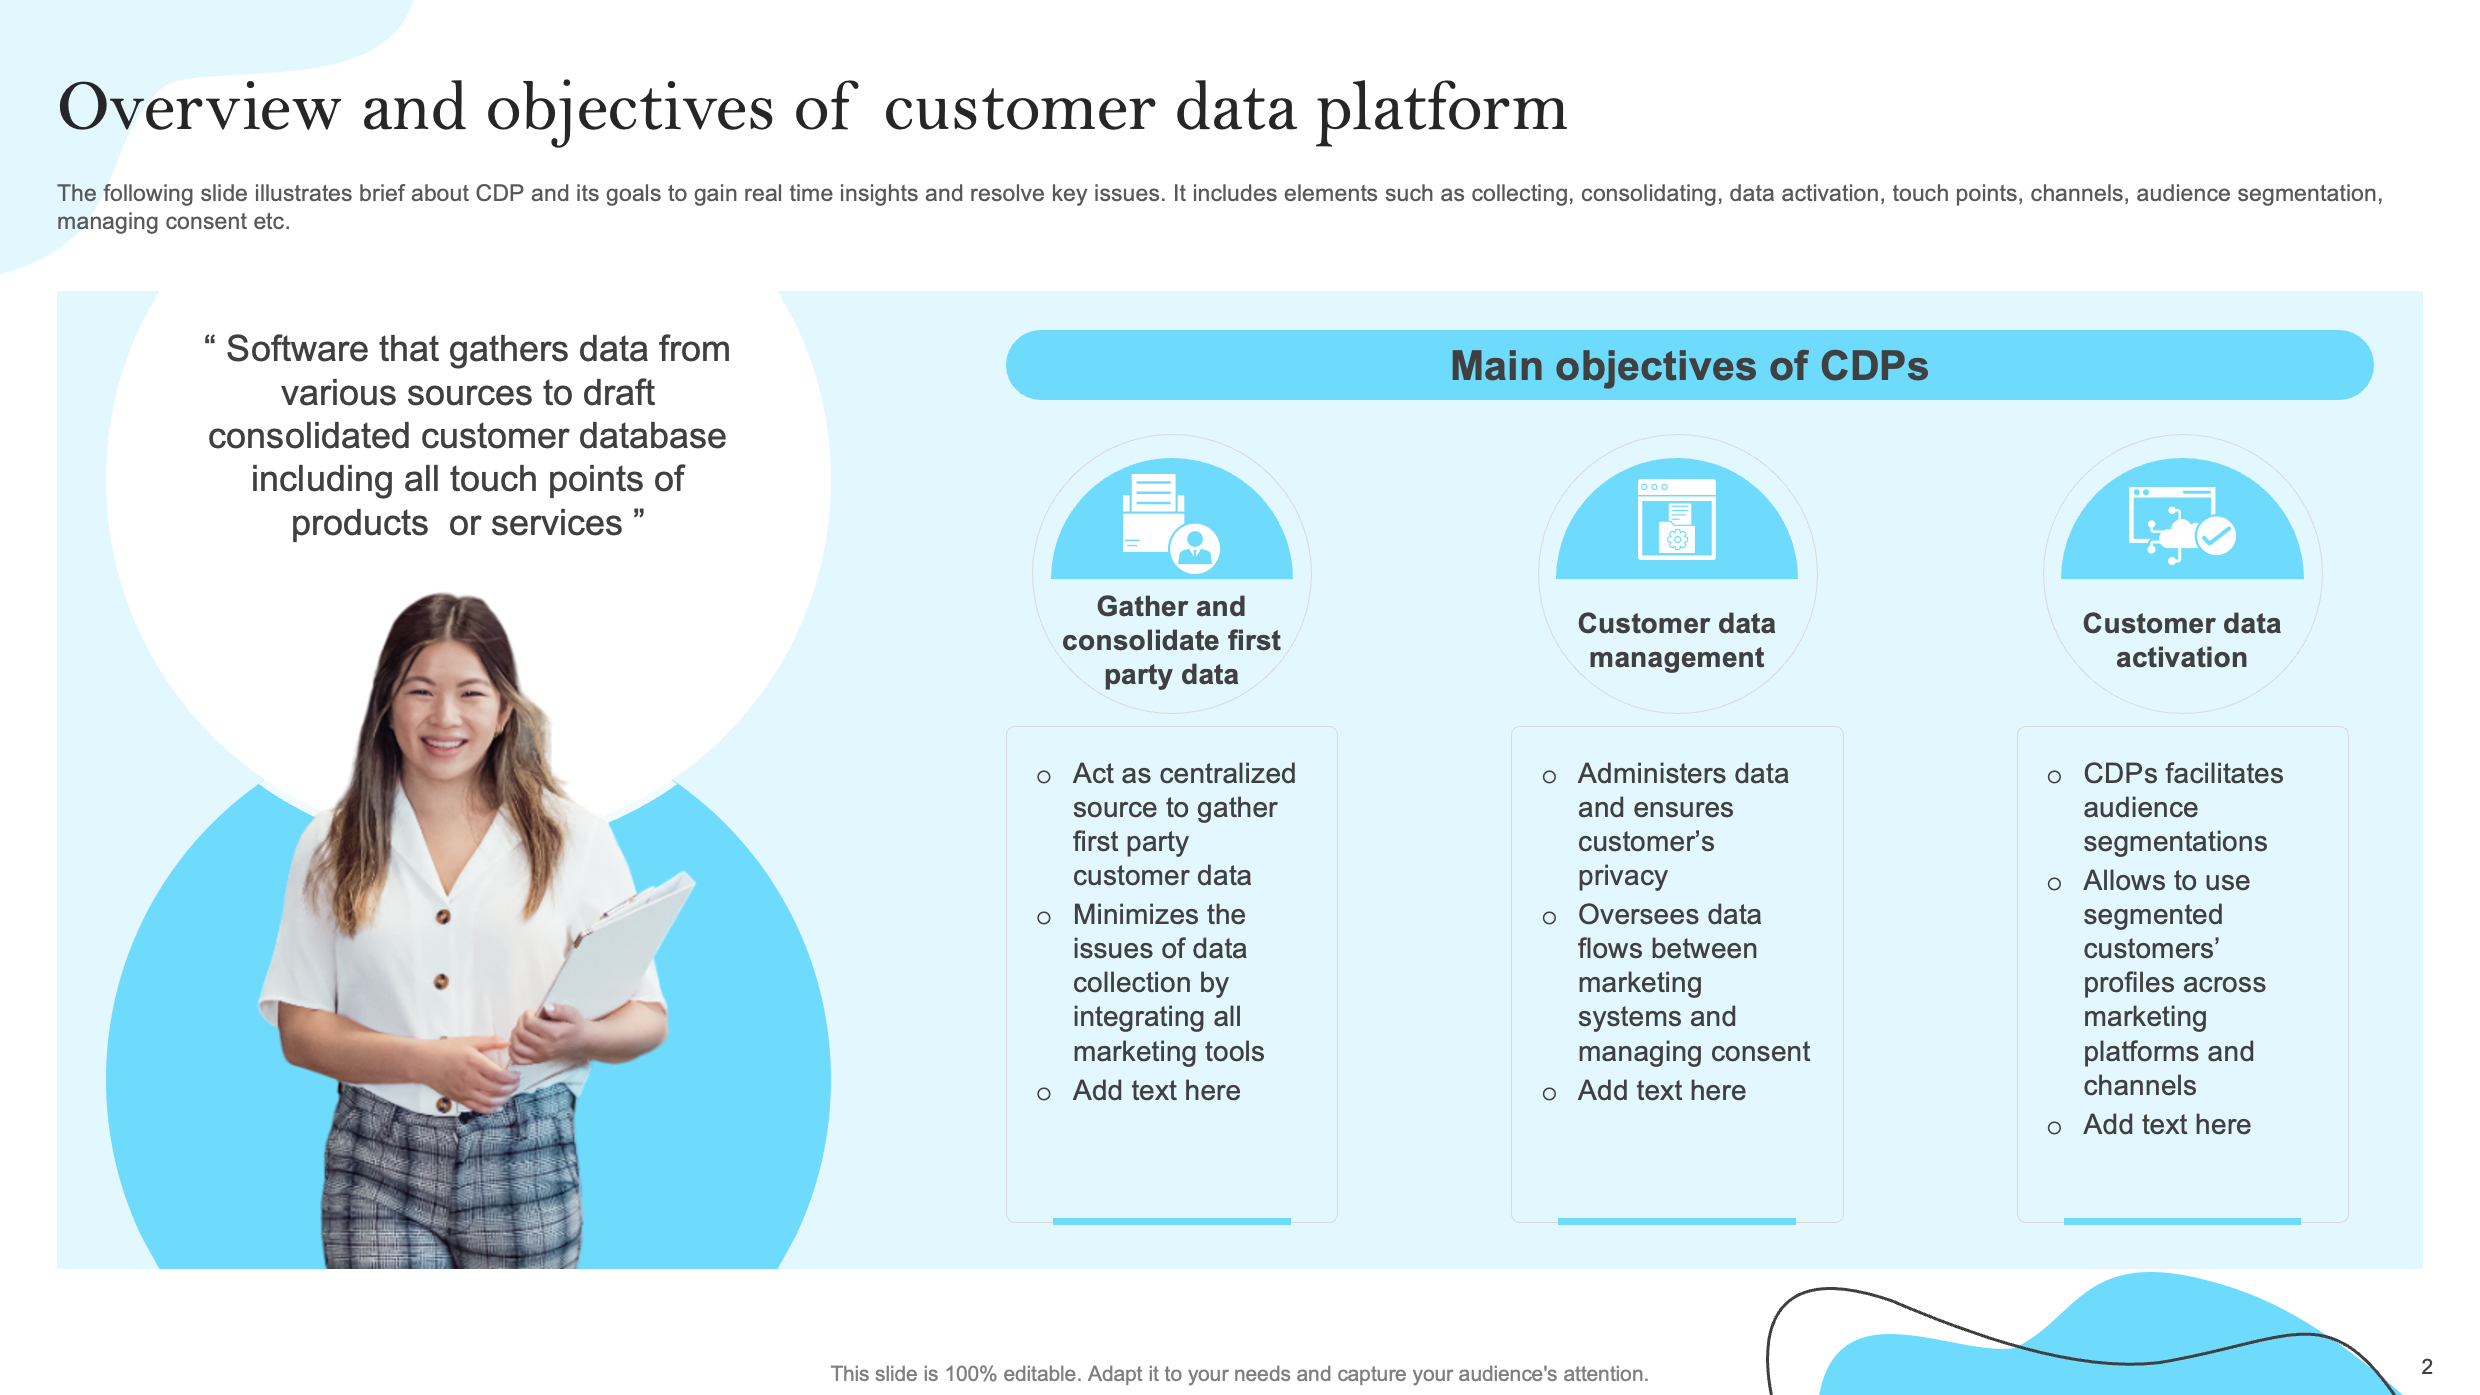 Overview and objectives of customer data platform